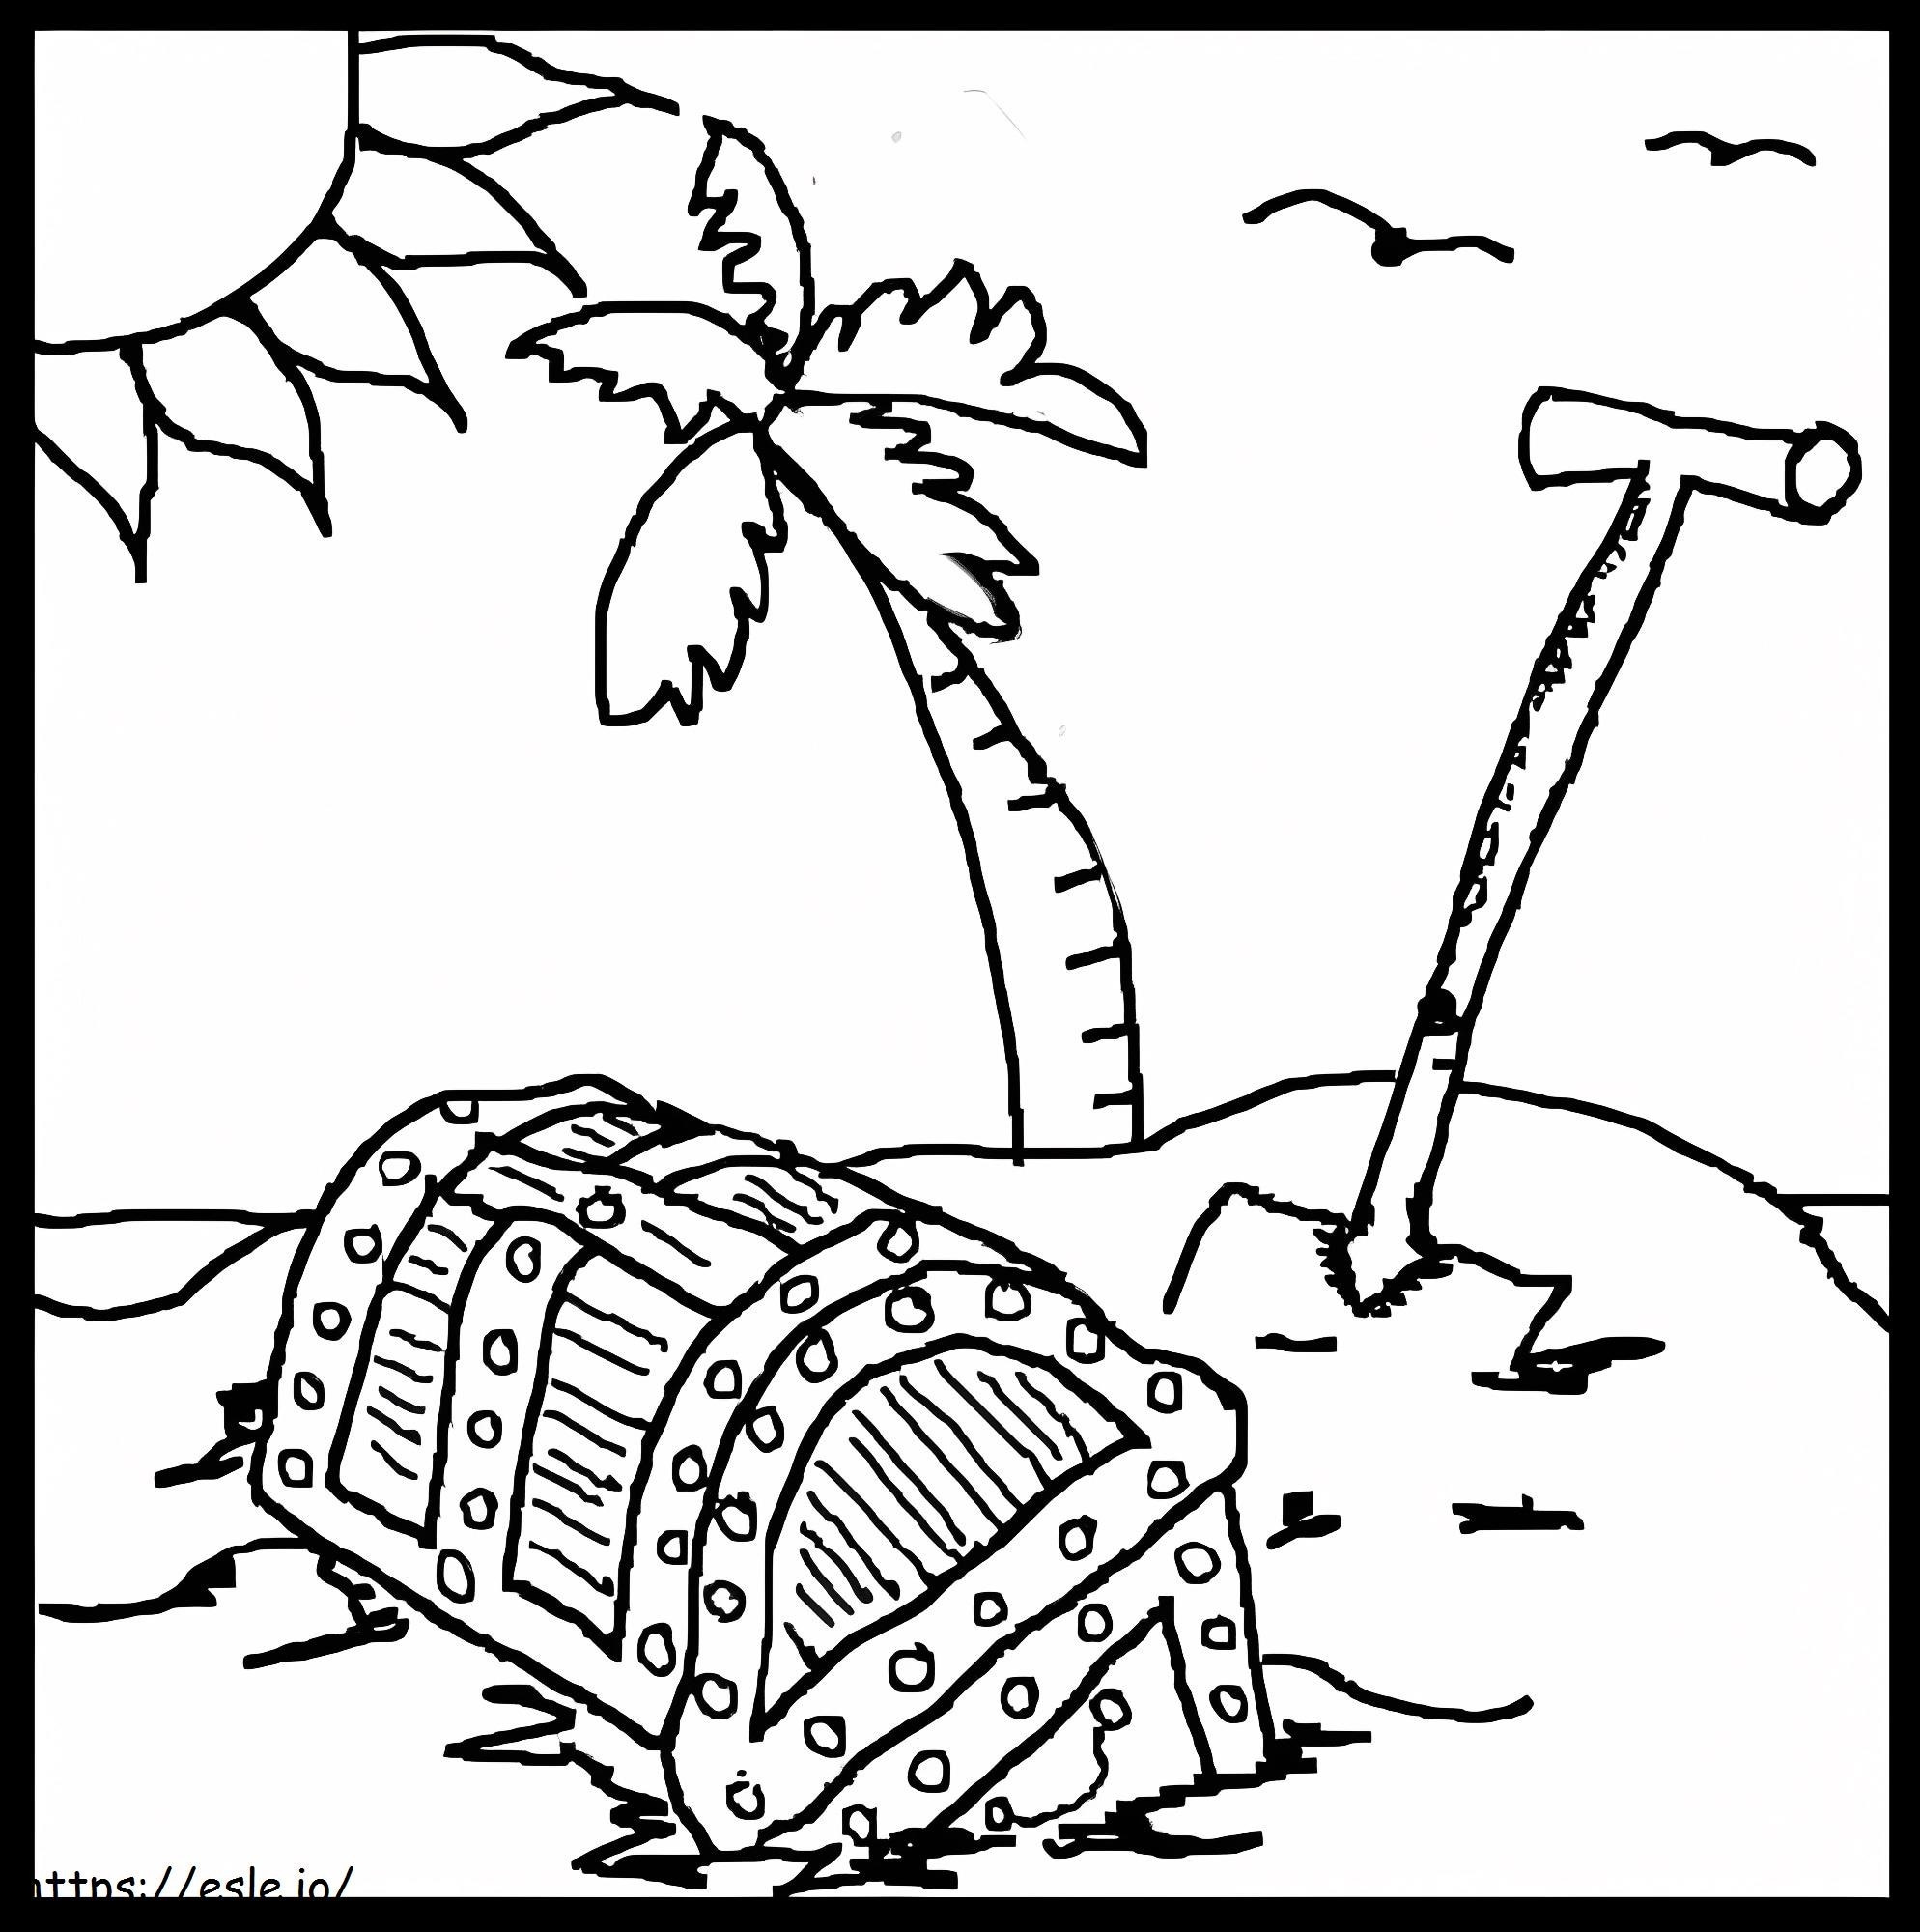 Treasure Chest On The Island coloring page